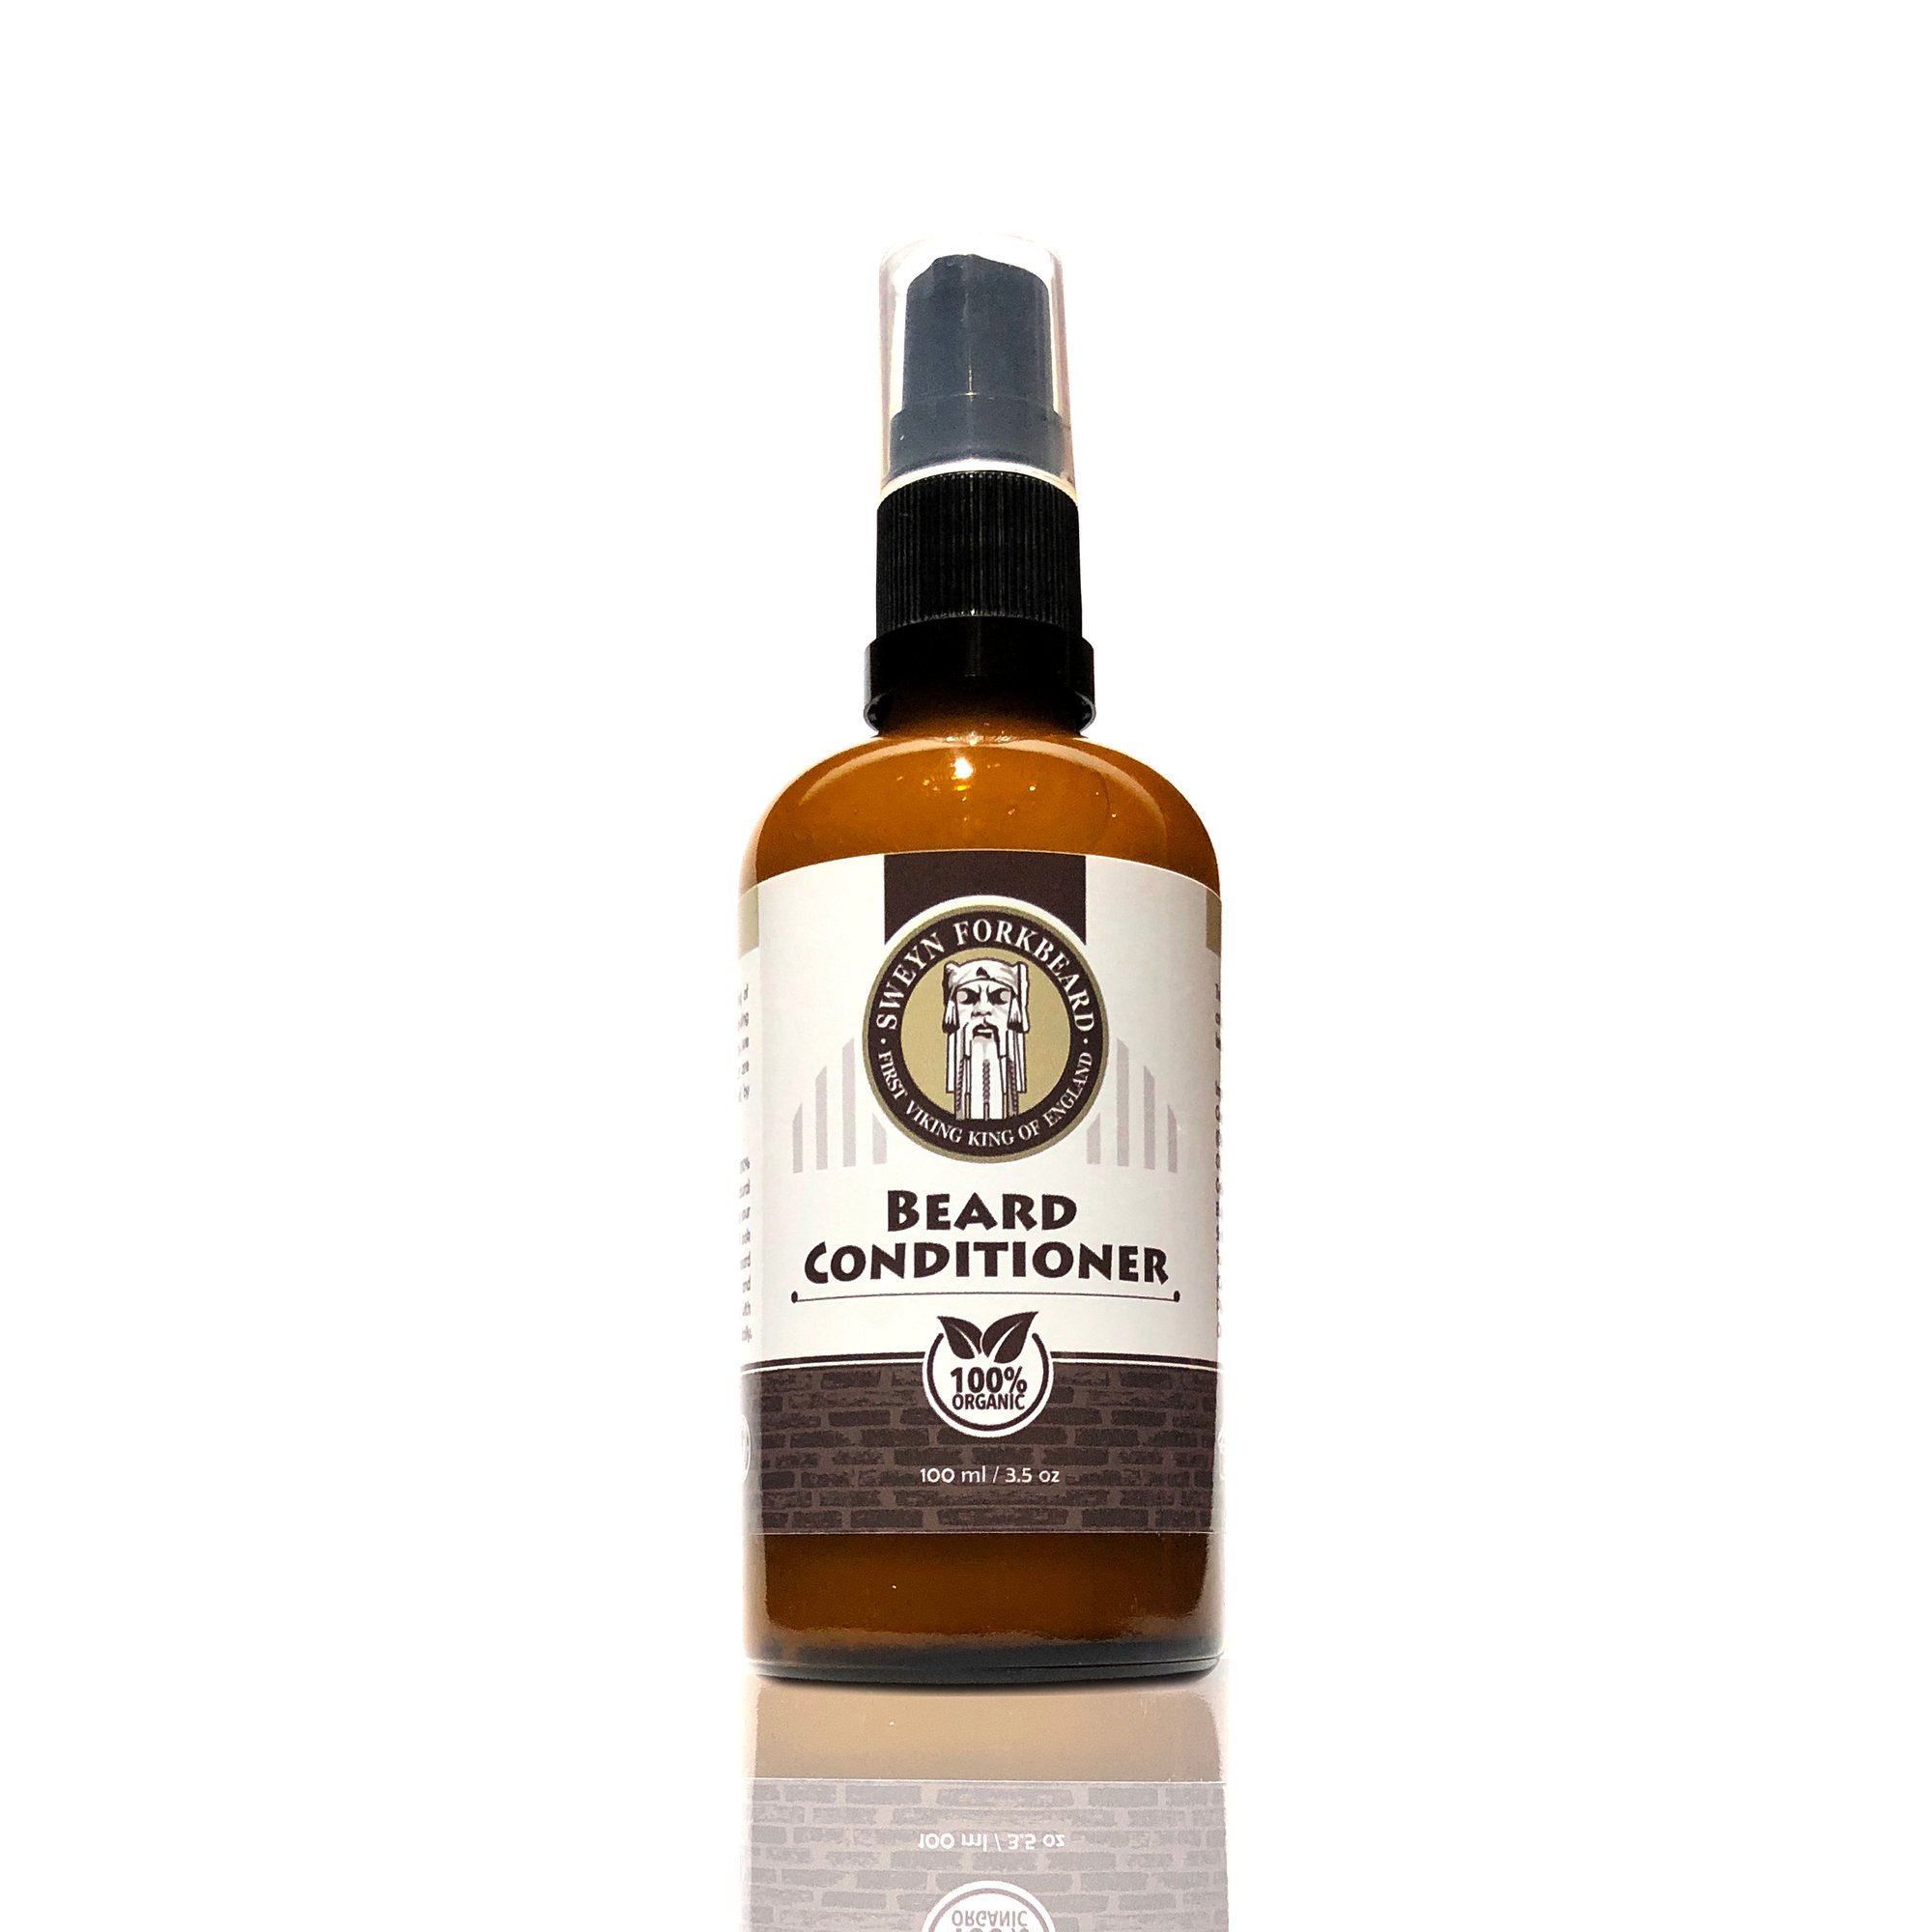 Organic Beard Oil, Hand-Crafted with 100% Organic Ingredients